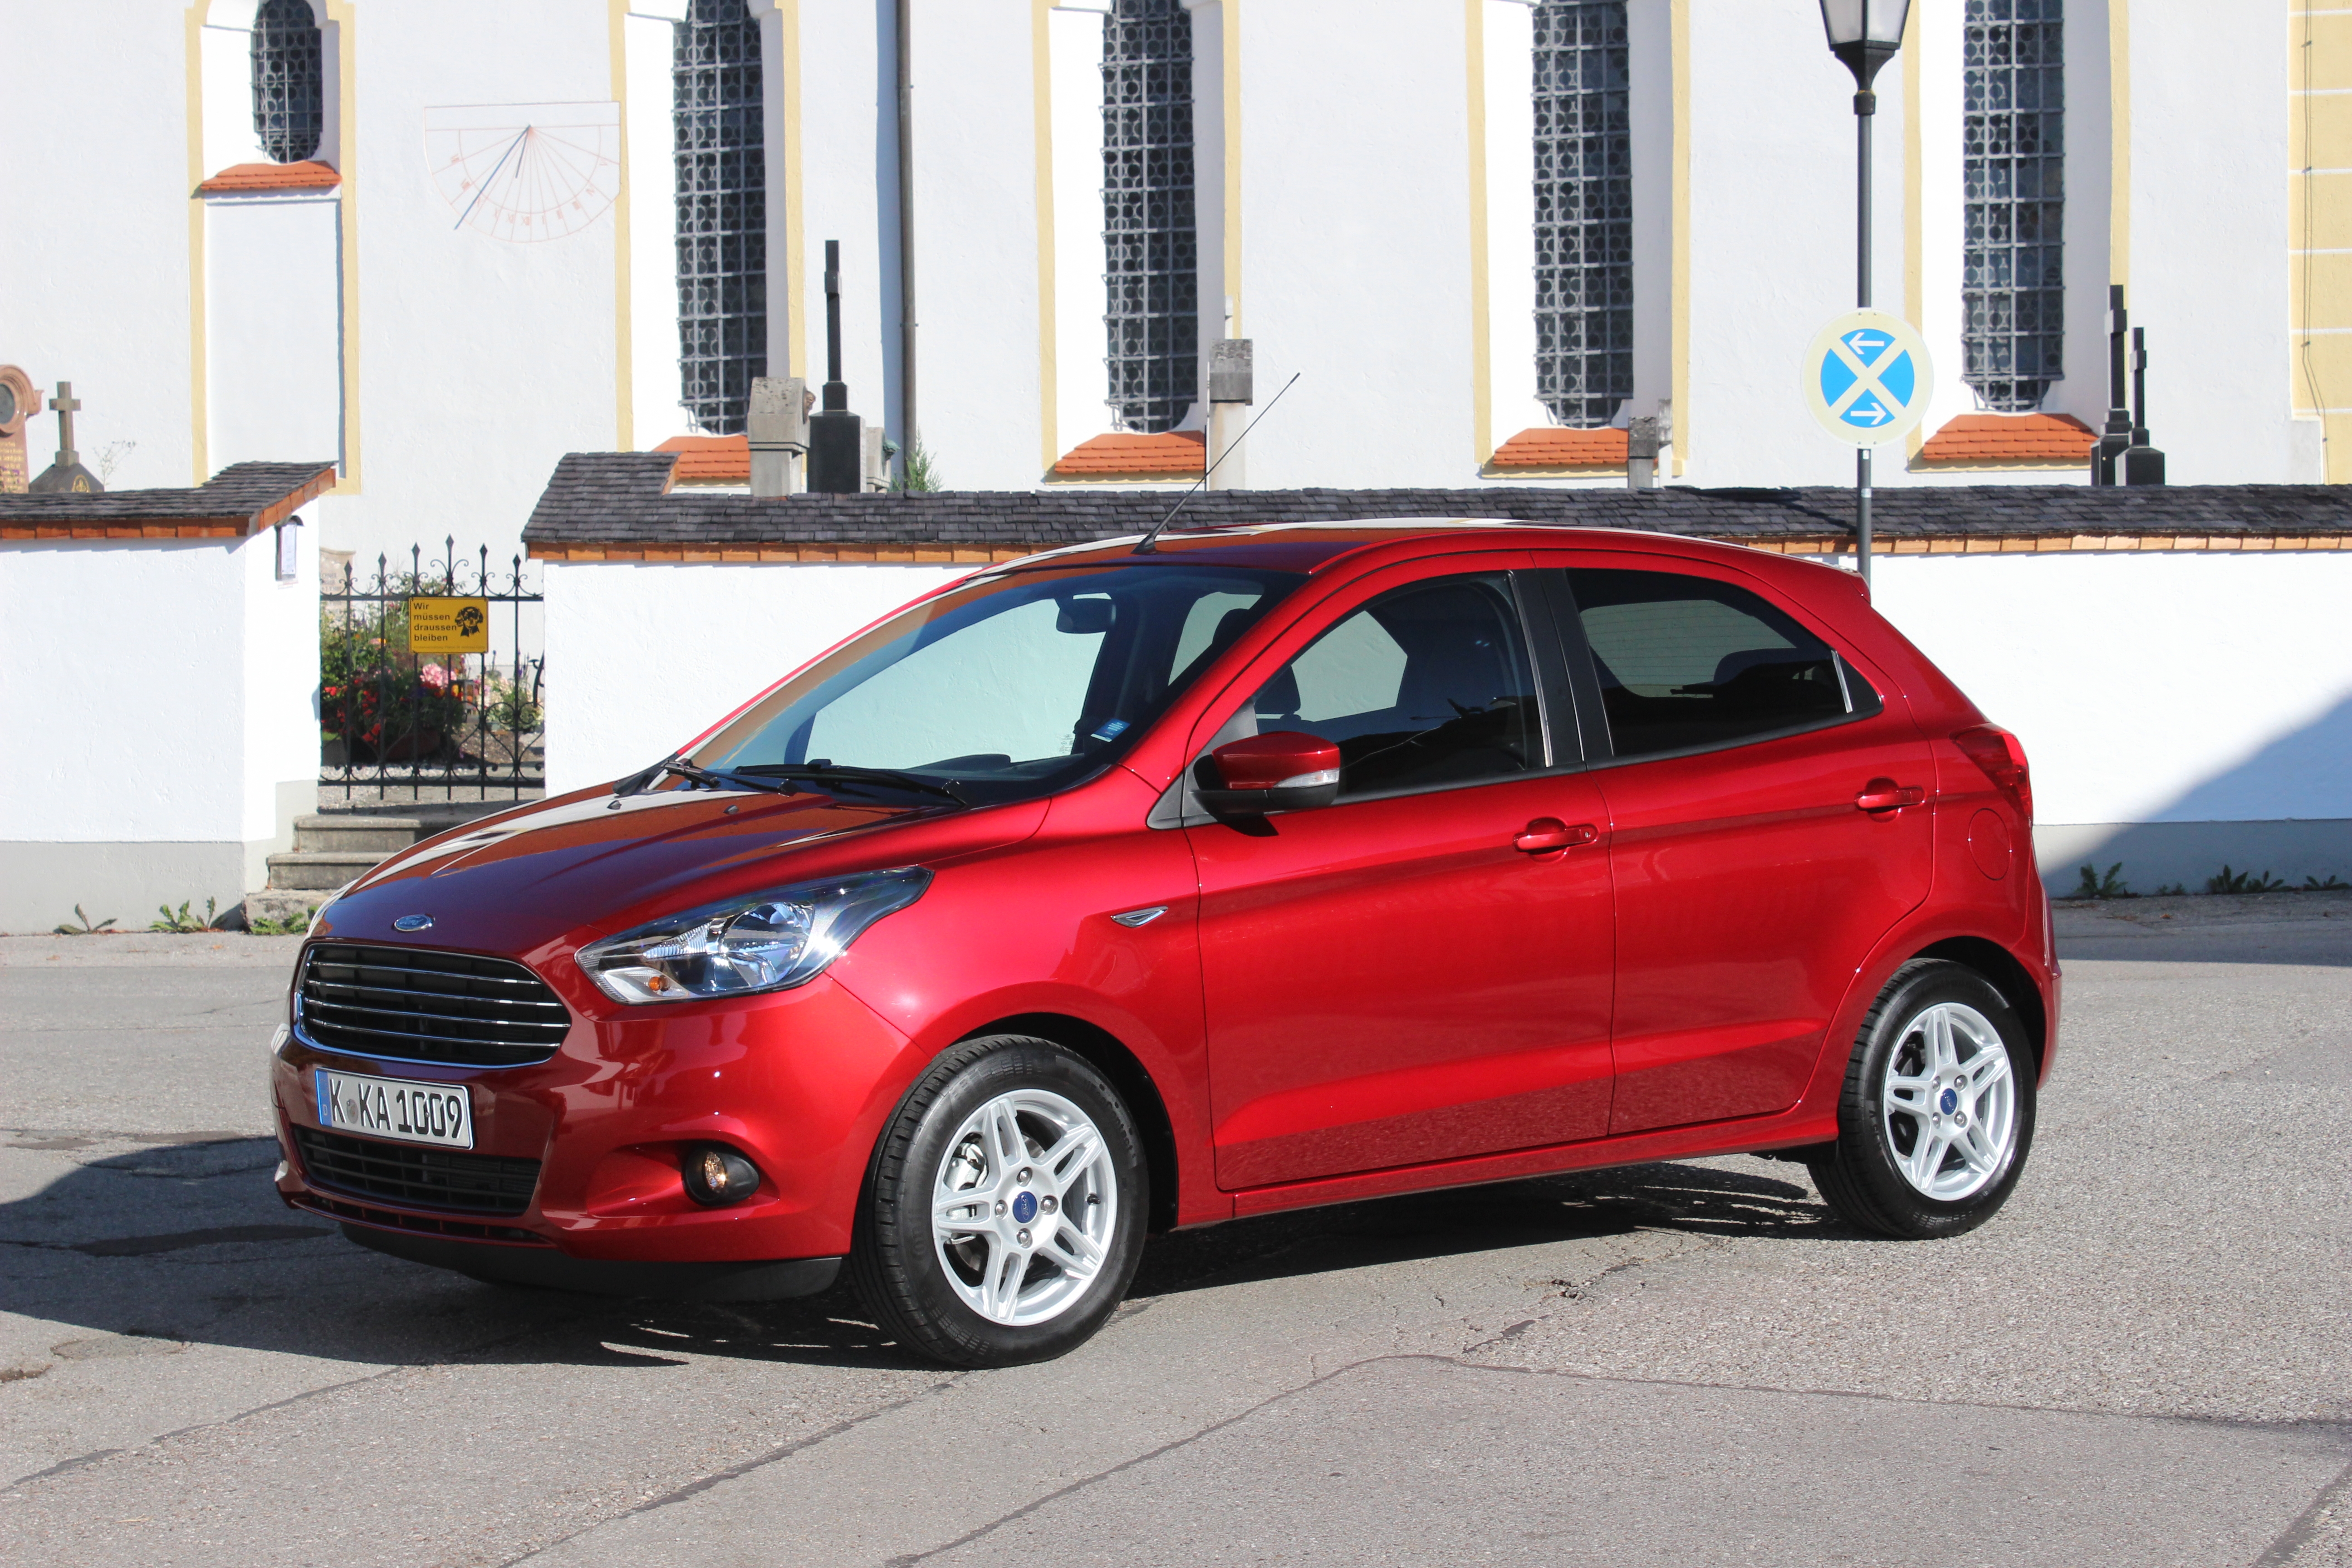 Ford Ka+ interior specifications